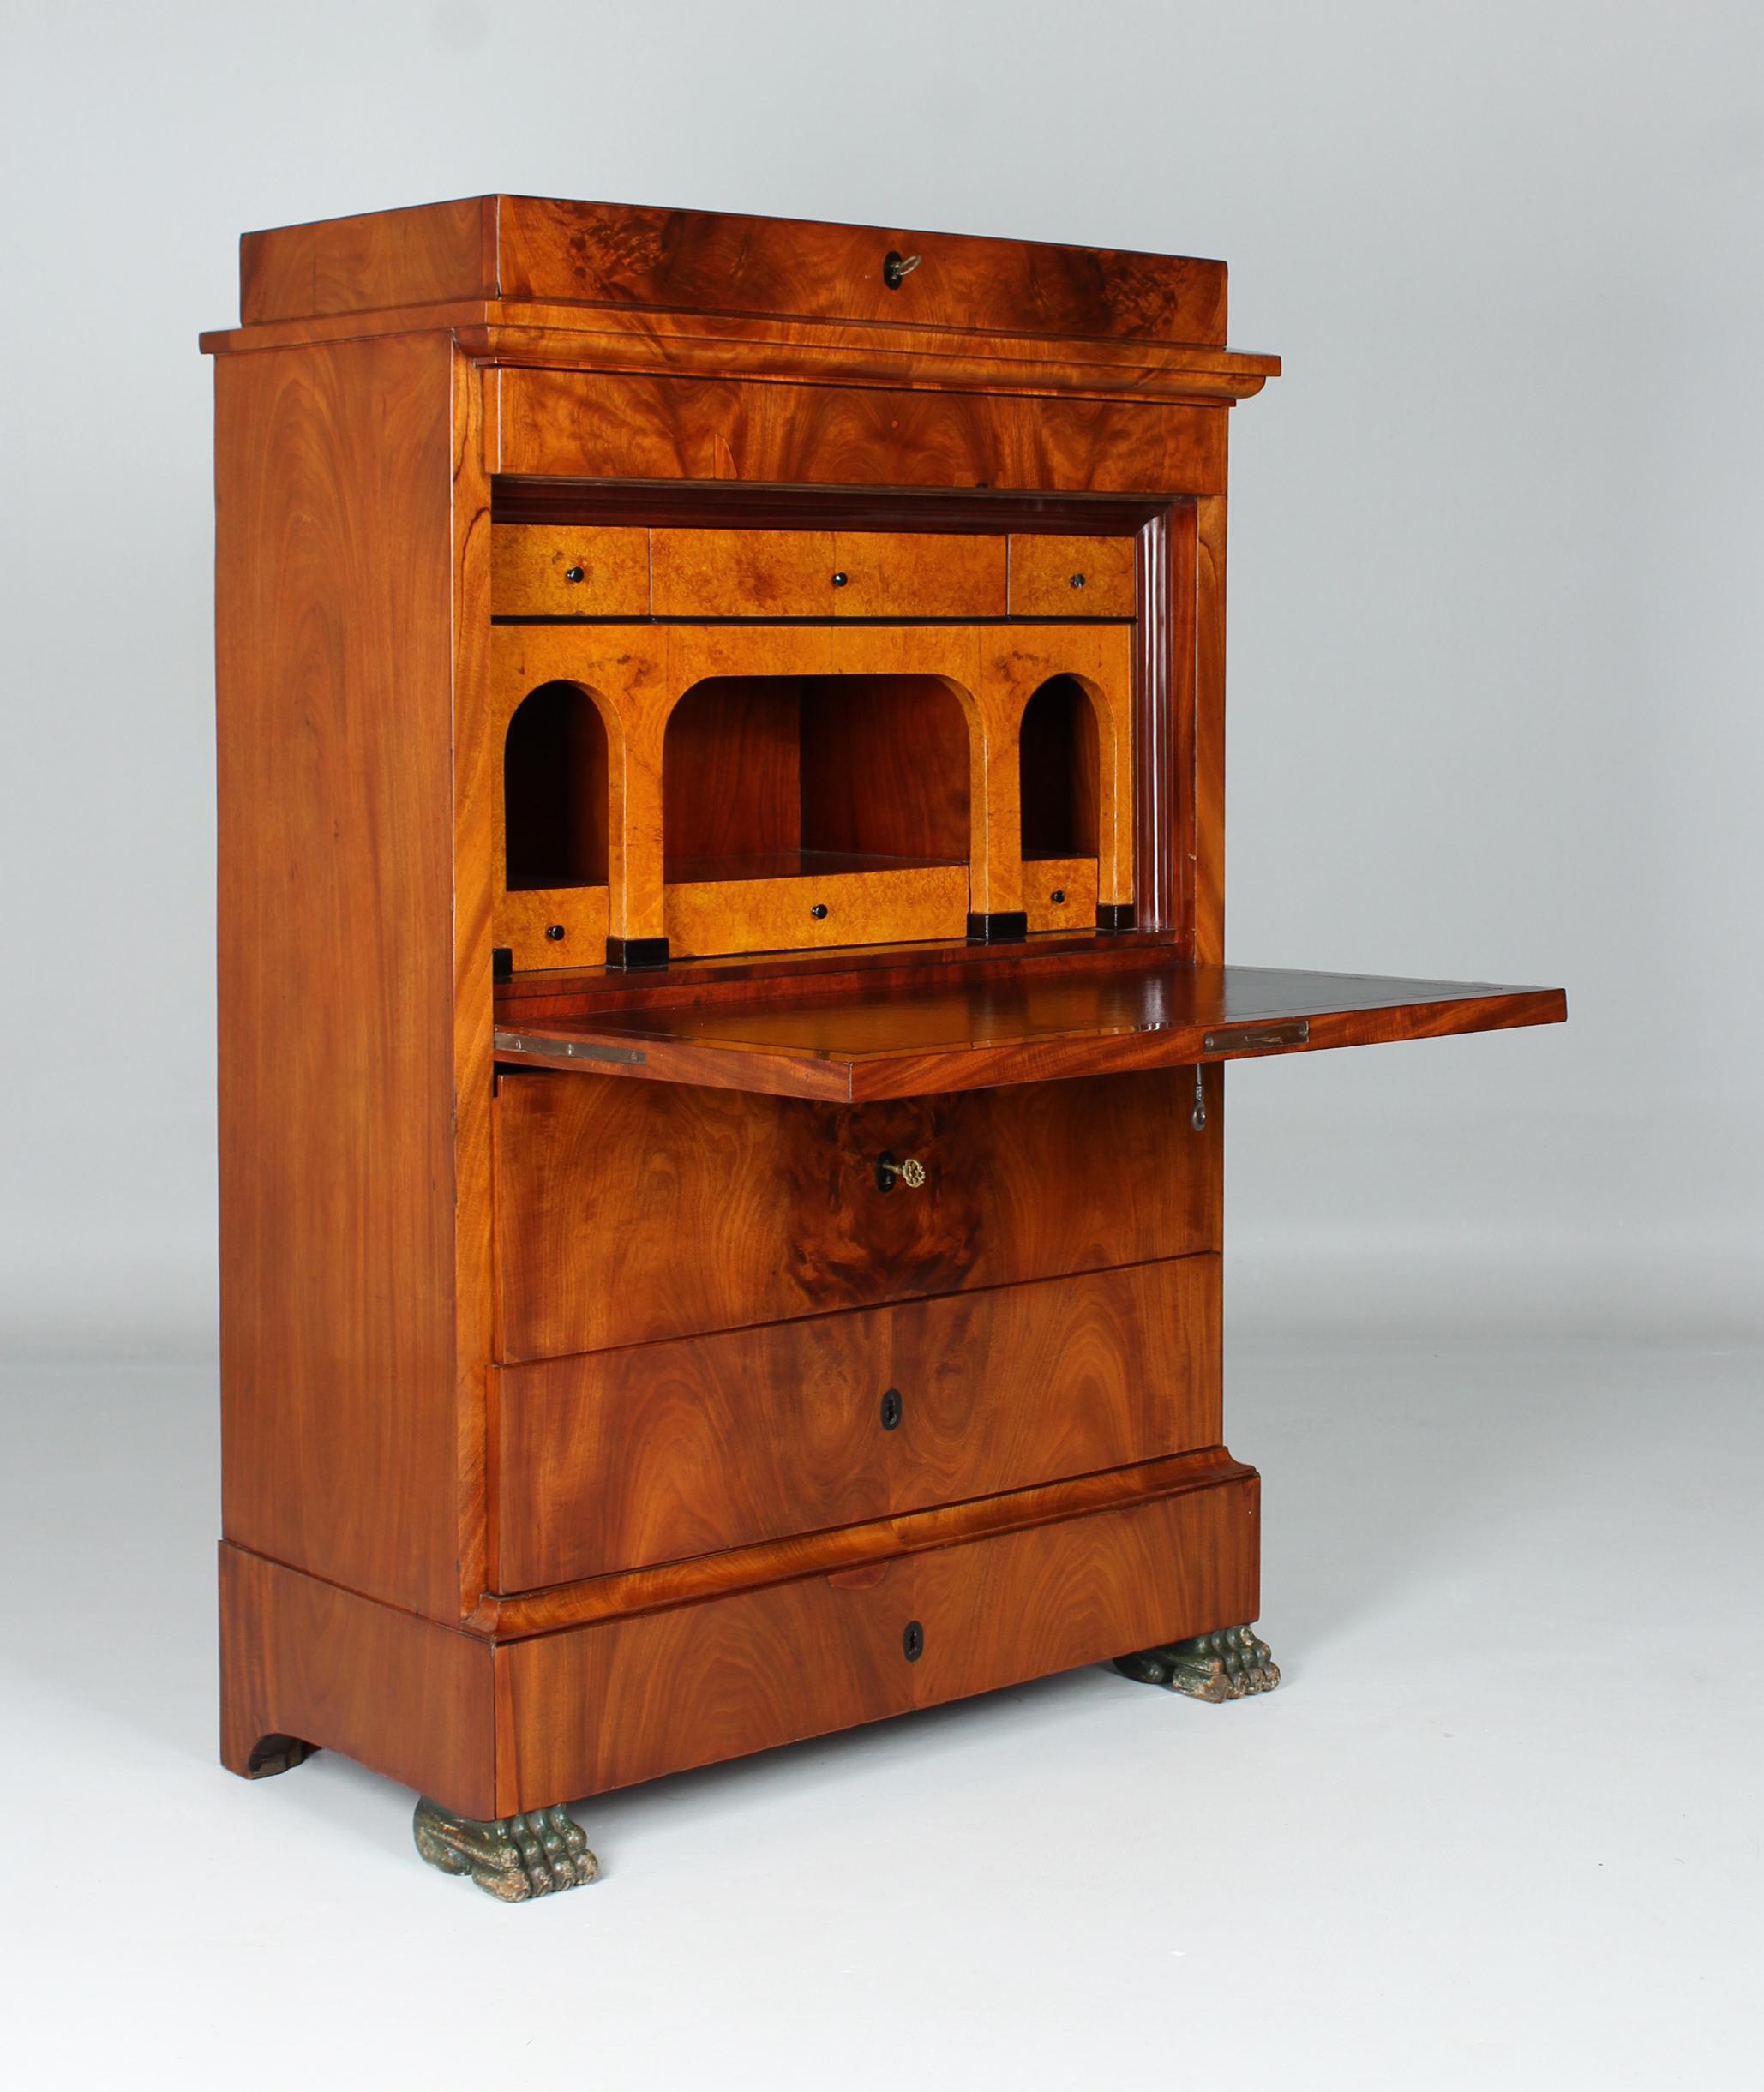 Antique standing secretary

North Germany
Biedermeier around 1830

Dimensions: H x W x D: 151 x 99 x 49 cm

Description:
Writing desk standing on lion's paws with a protruding plinth typical of the region.
We see a cleanly continuous grain pattern